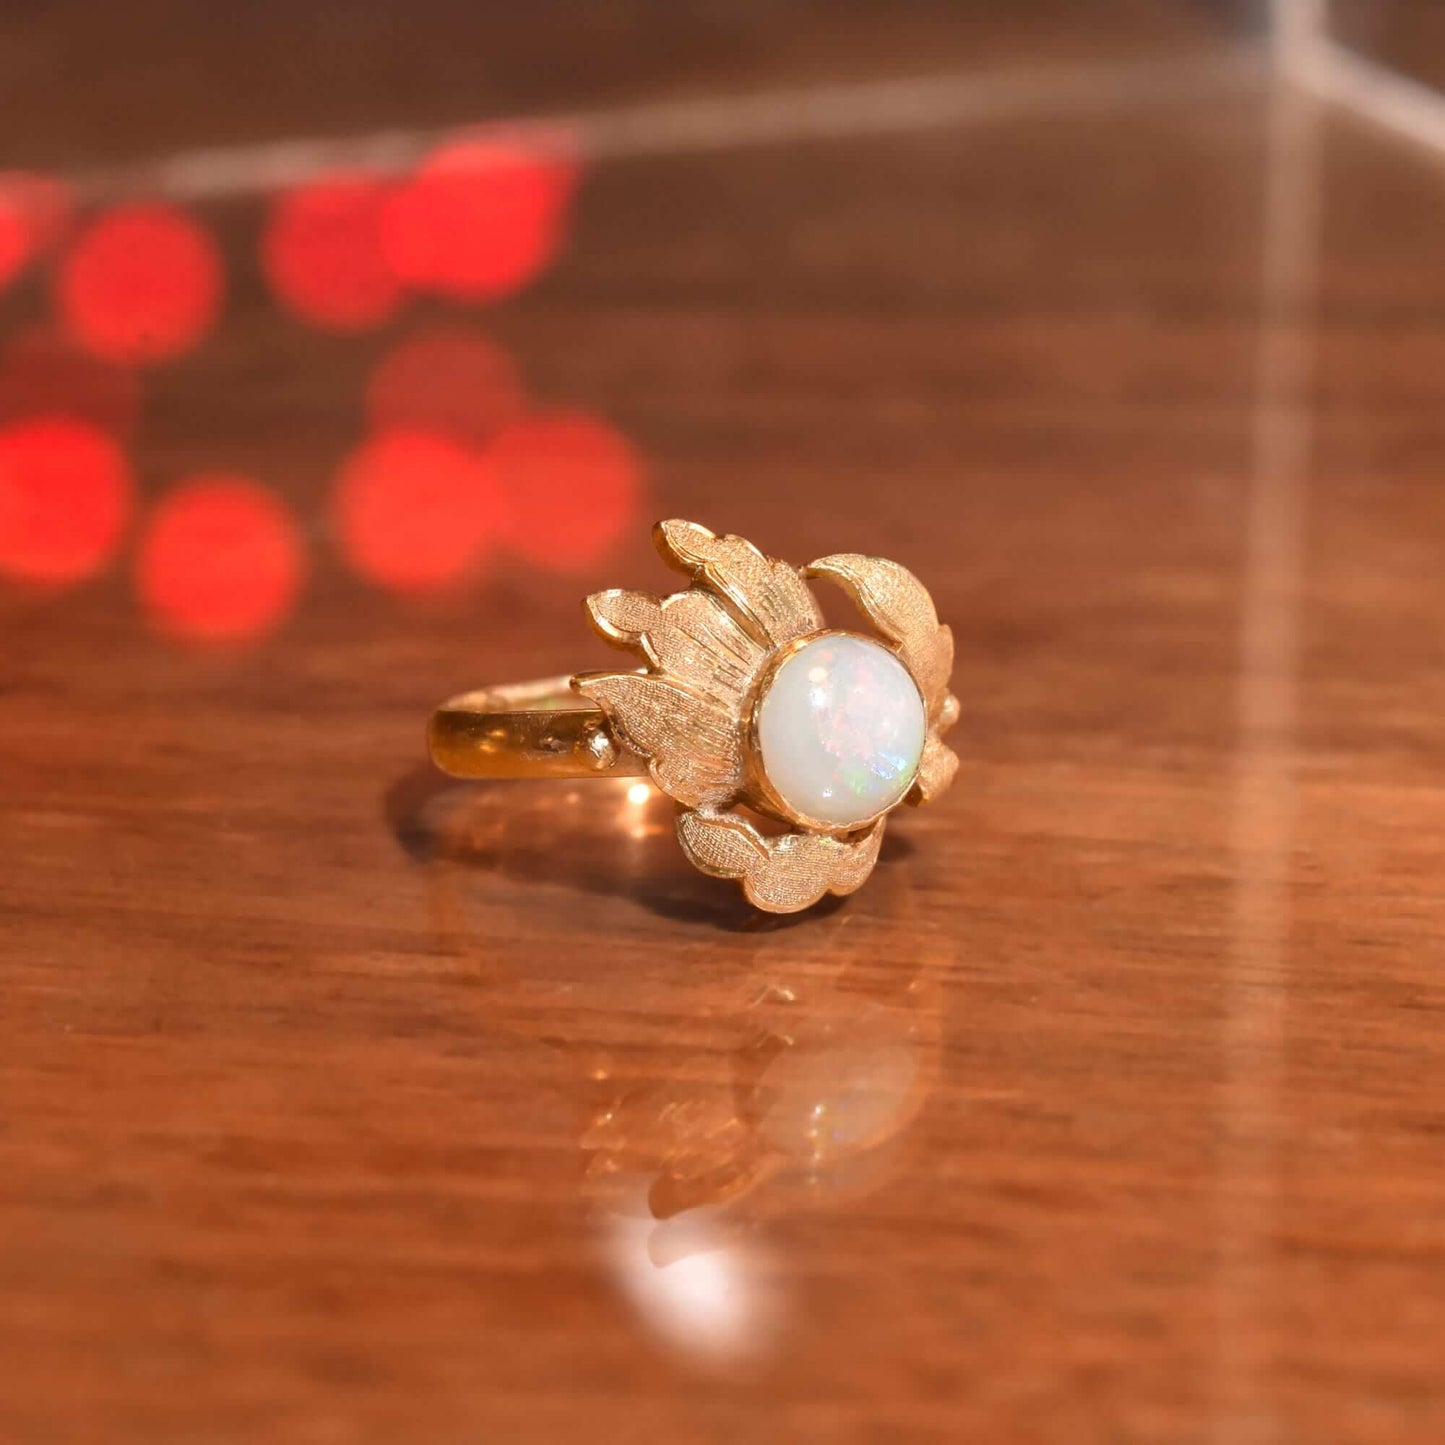 18K Opal Cocktail Ring In Yellow Gold, Asymmetric Leaf Setting, Estate Jewelry, Size 8 1/2 US